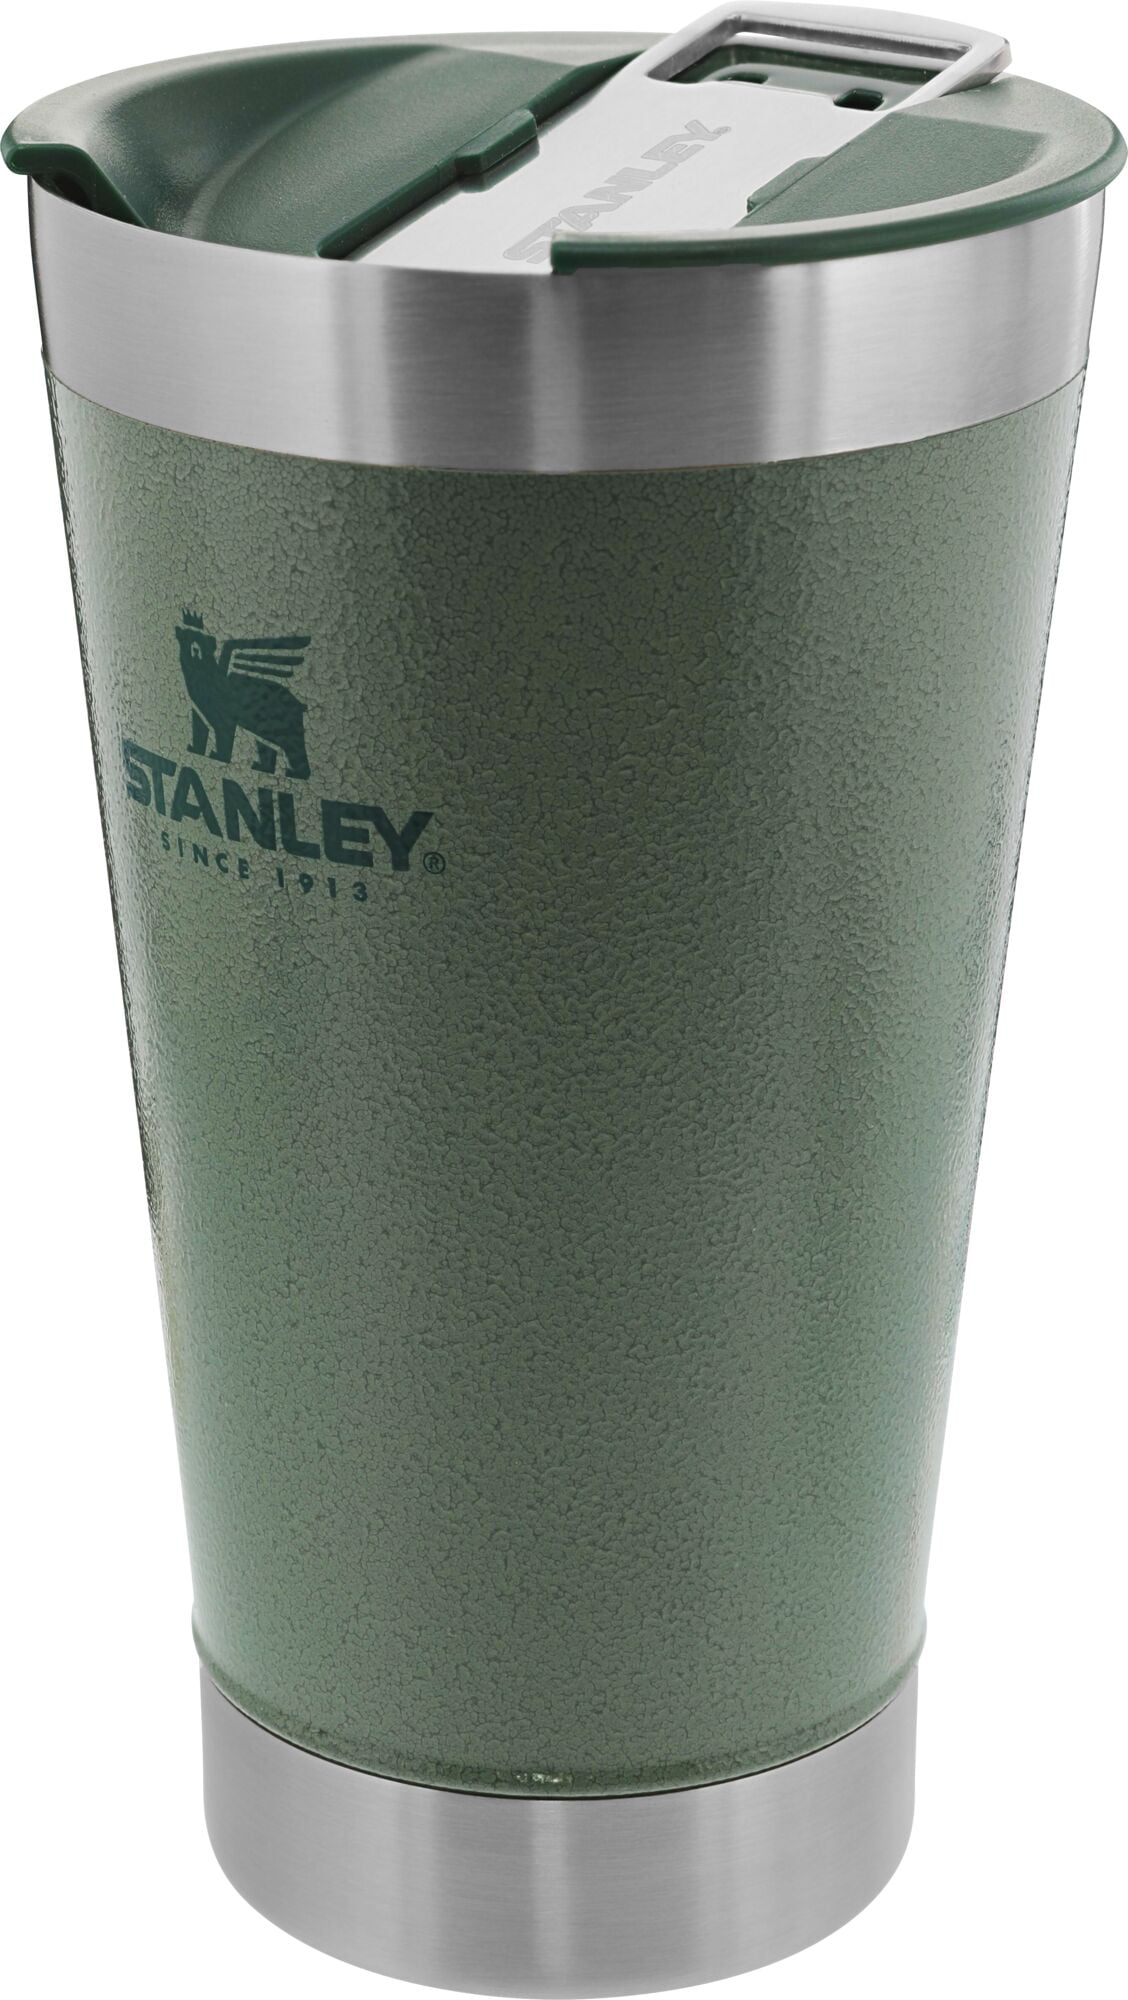 Stanley Classic Stay Chill Vacuum Insulated Pint Glass with Lid, 16oz  Stainless Steel Beer Mug with Built-in Bottle Opener